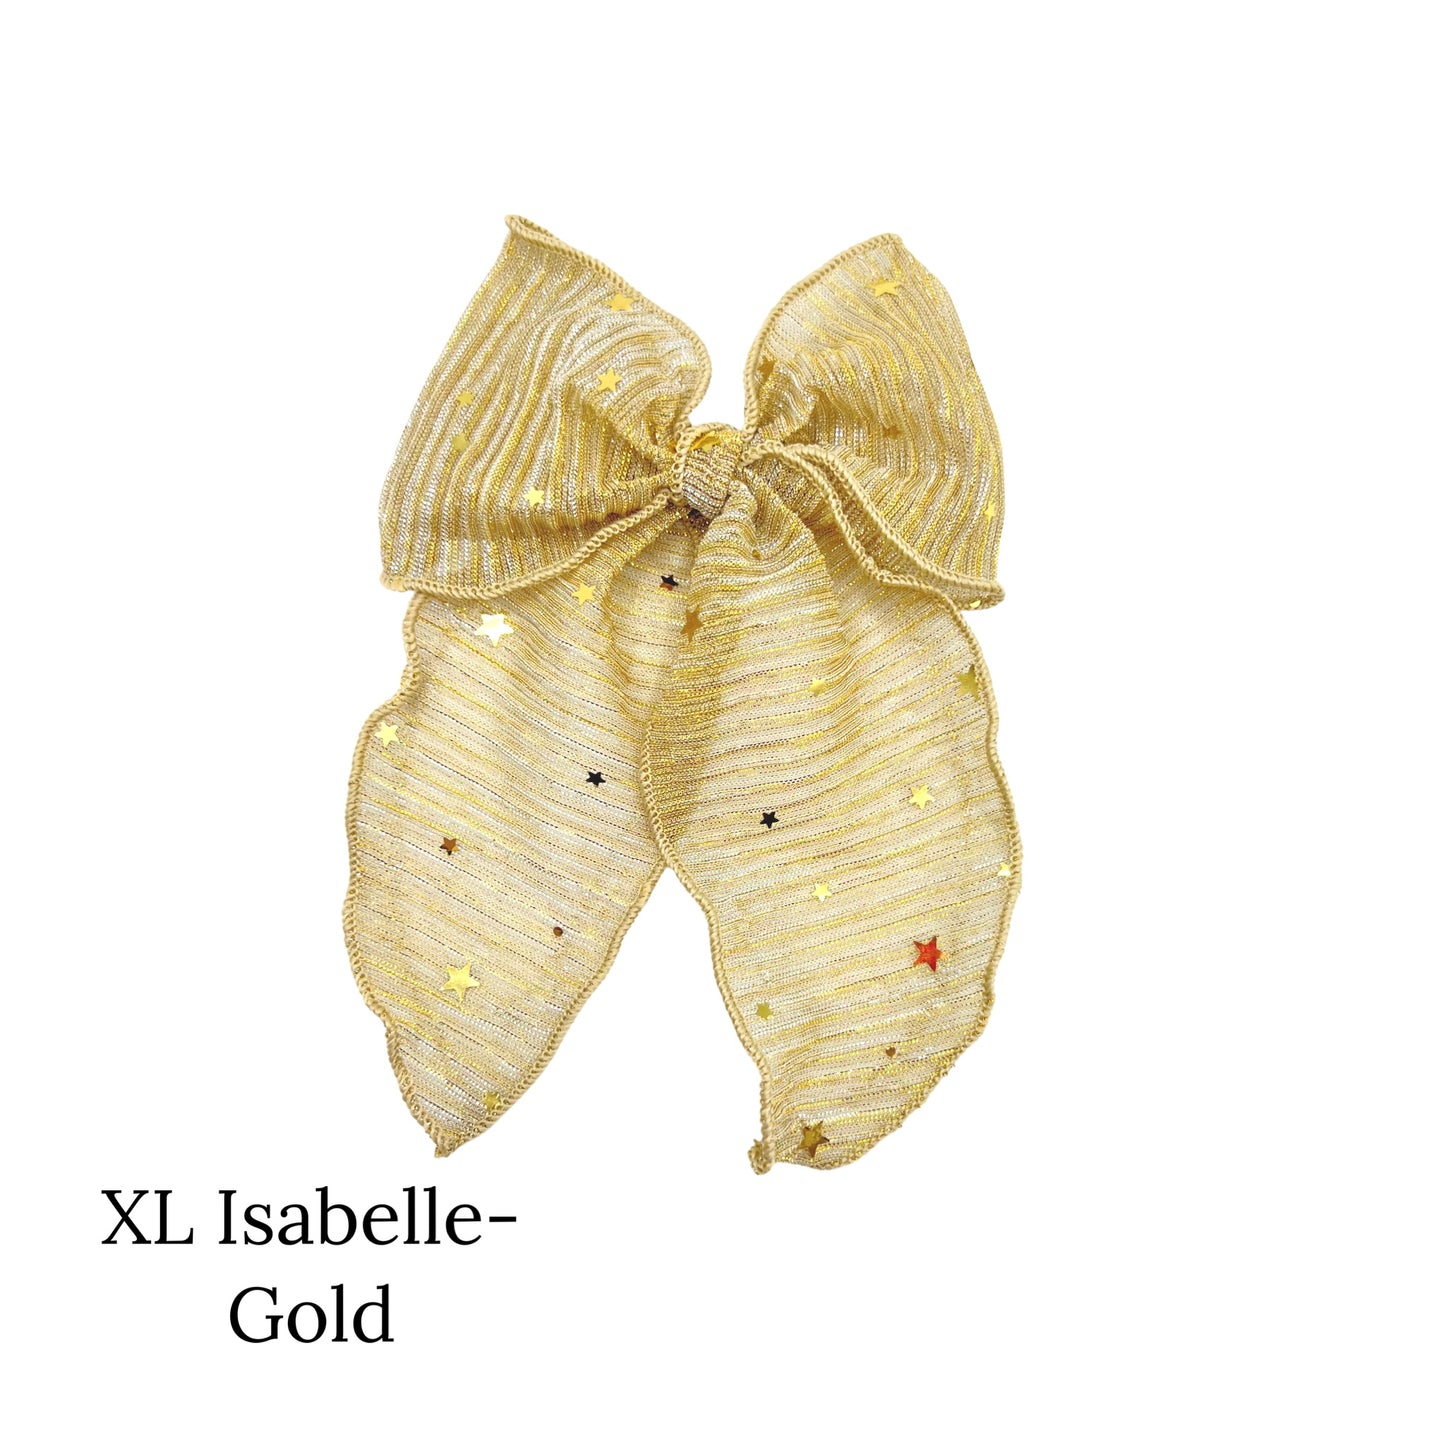 Large gold bow with gold stars on a white background